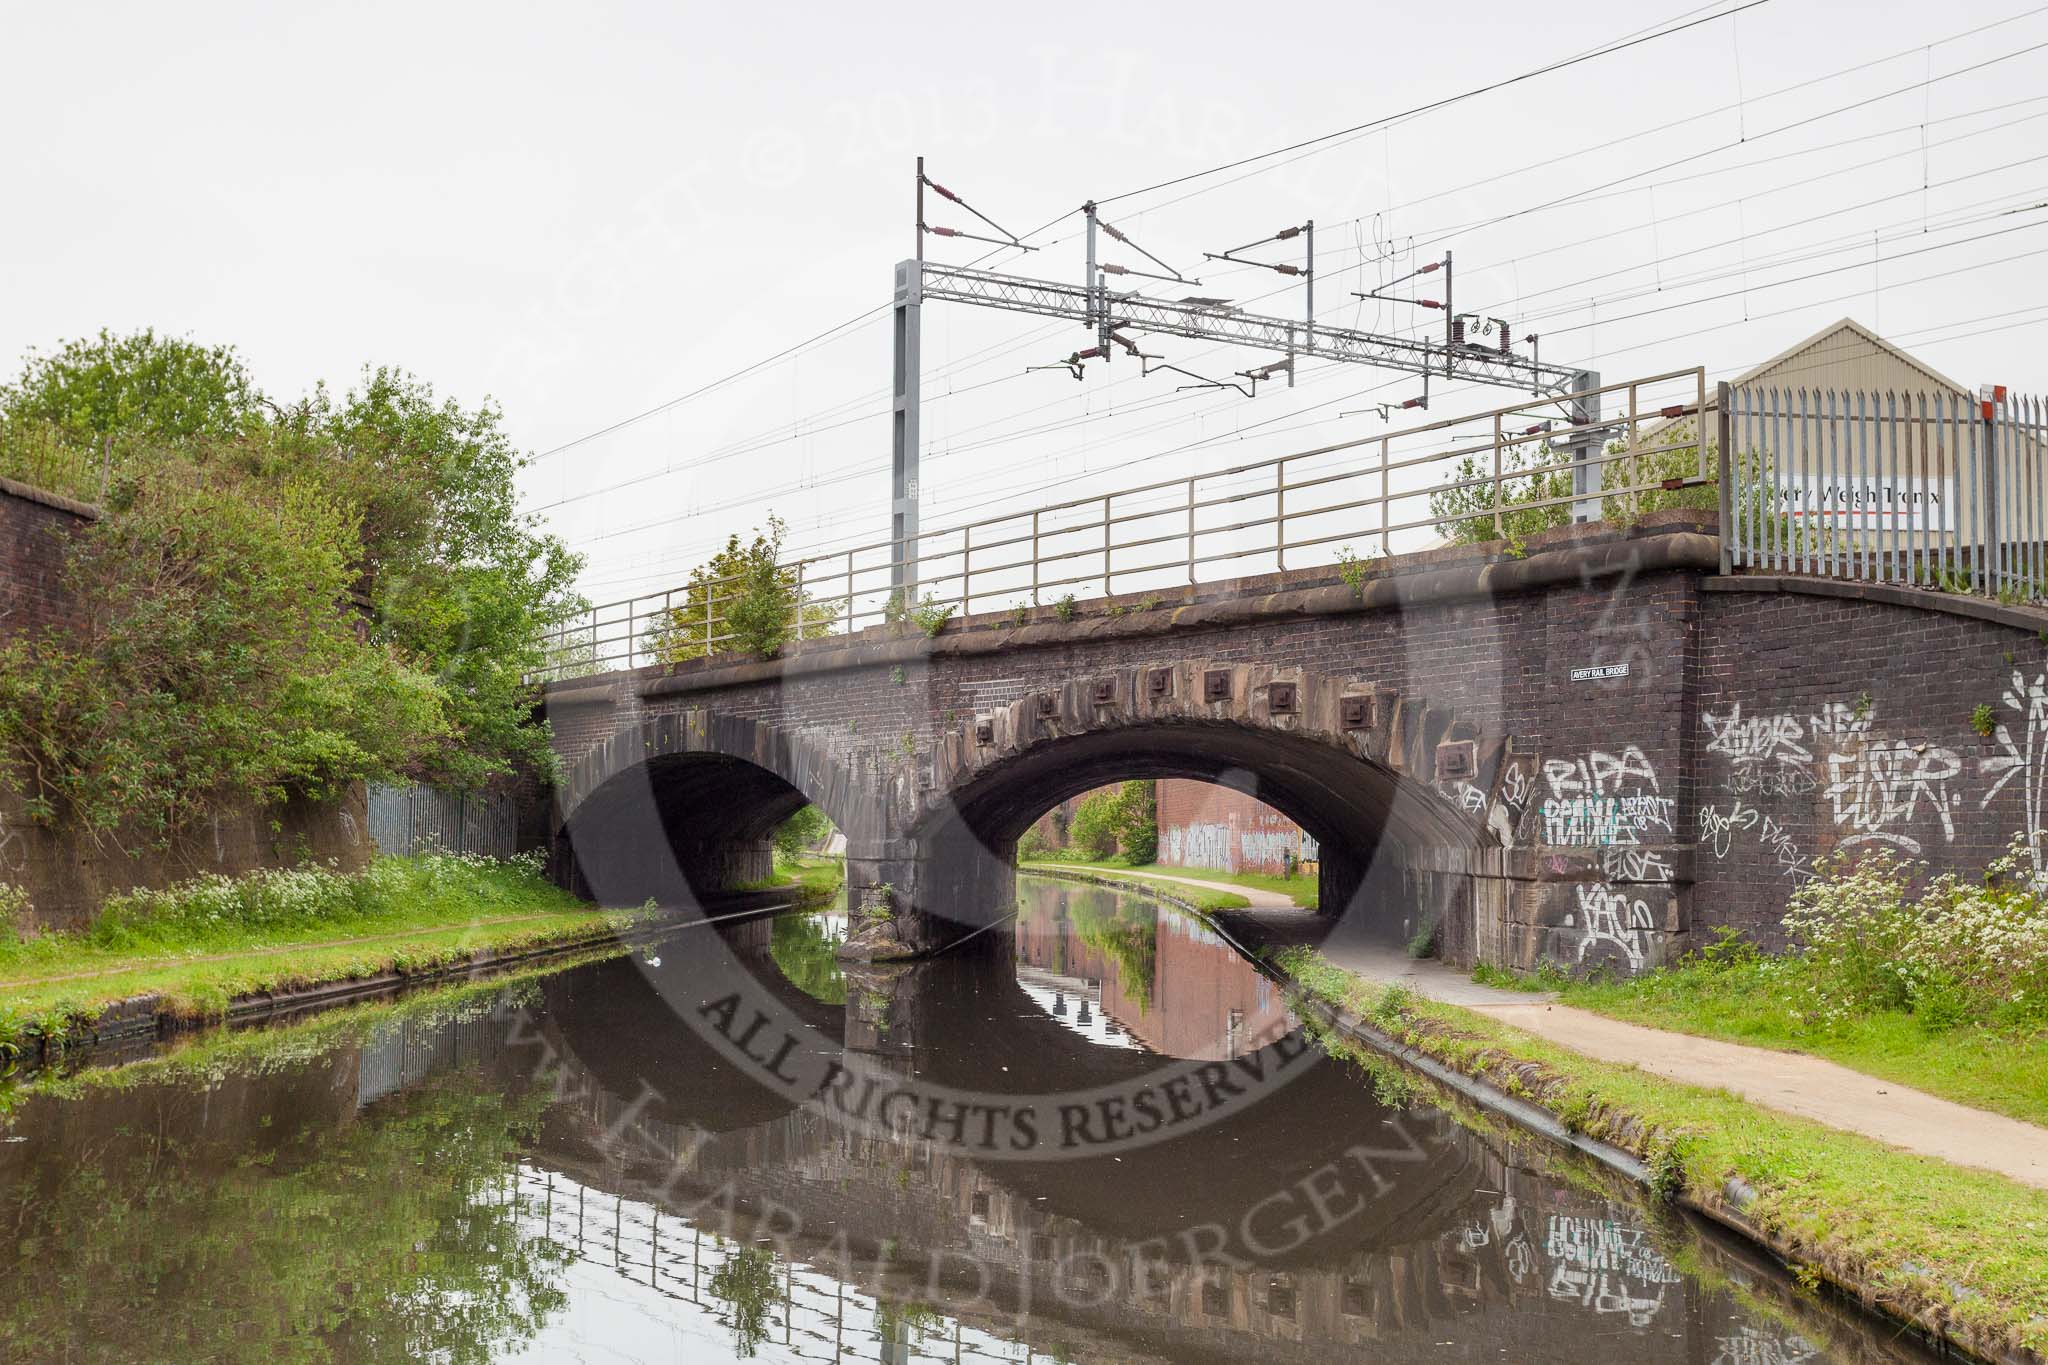 BCN 24h Marathon Challenge 2015: Avery Rail Bridge over the BCN New Main Line. The bridge is also called Soho Rail Bridge. Parallel to the canal on the right was a small loop than ran past Soho Foundry. The company was later aquired by Avery, and the loop became Avery's Basin.
Birmingham Canal Navigations,



on 23 May 2015 at 09:57, image #46